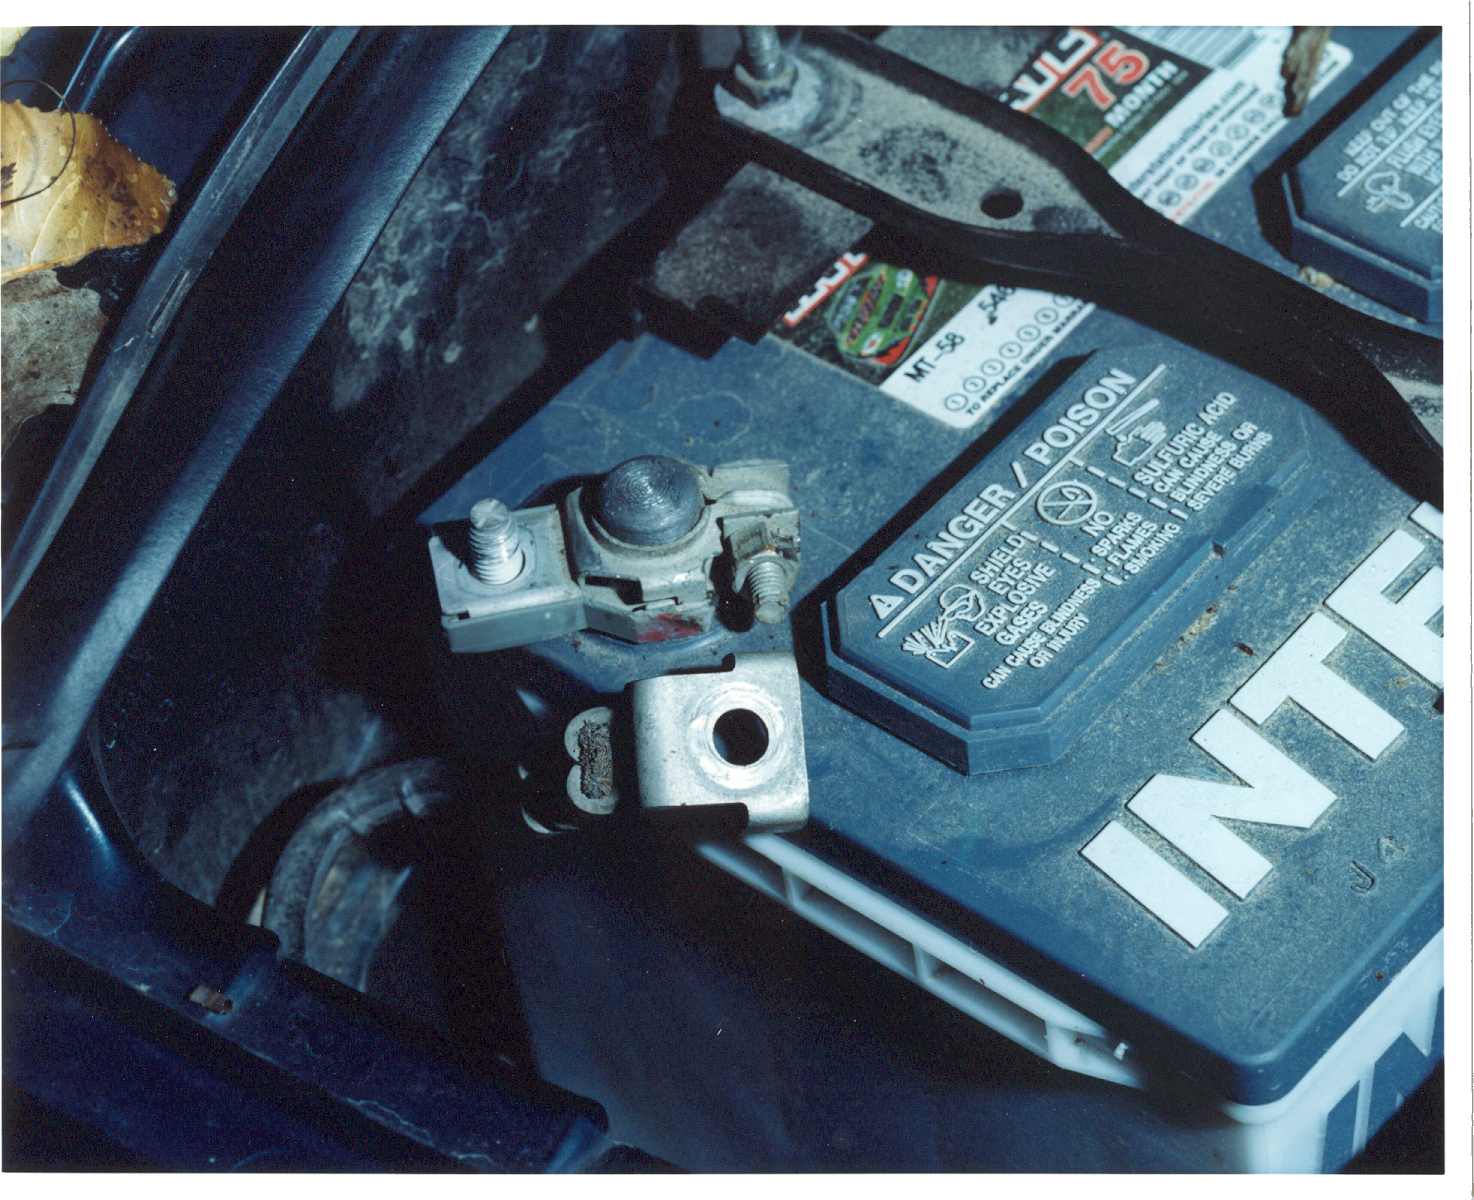 Evidence photo the state presented at Steven Avery's murder trial showing under the hood of Teresa Halbach's car.